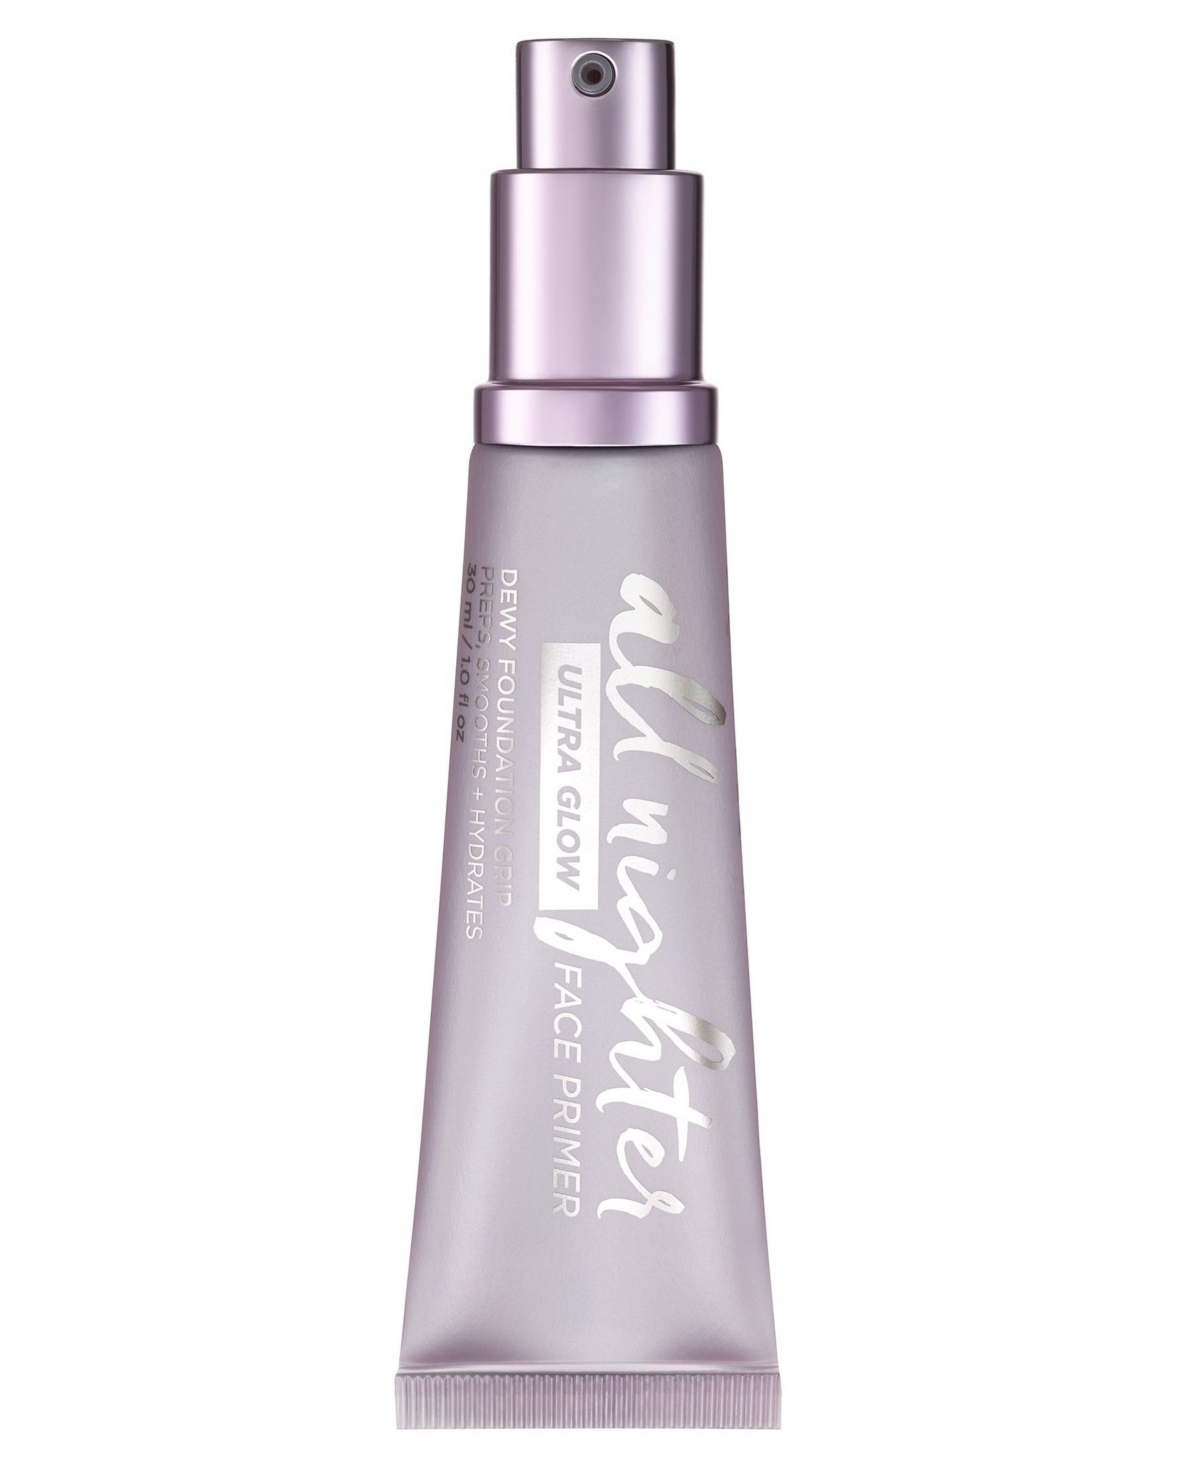 All Nighter Extra Glow Face Primer, 1-oz.